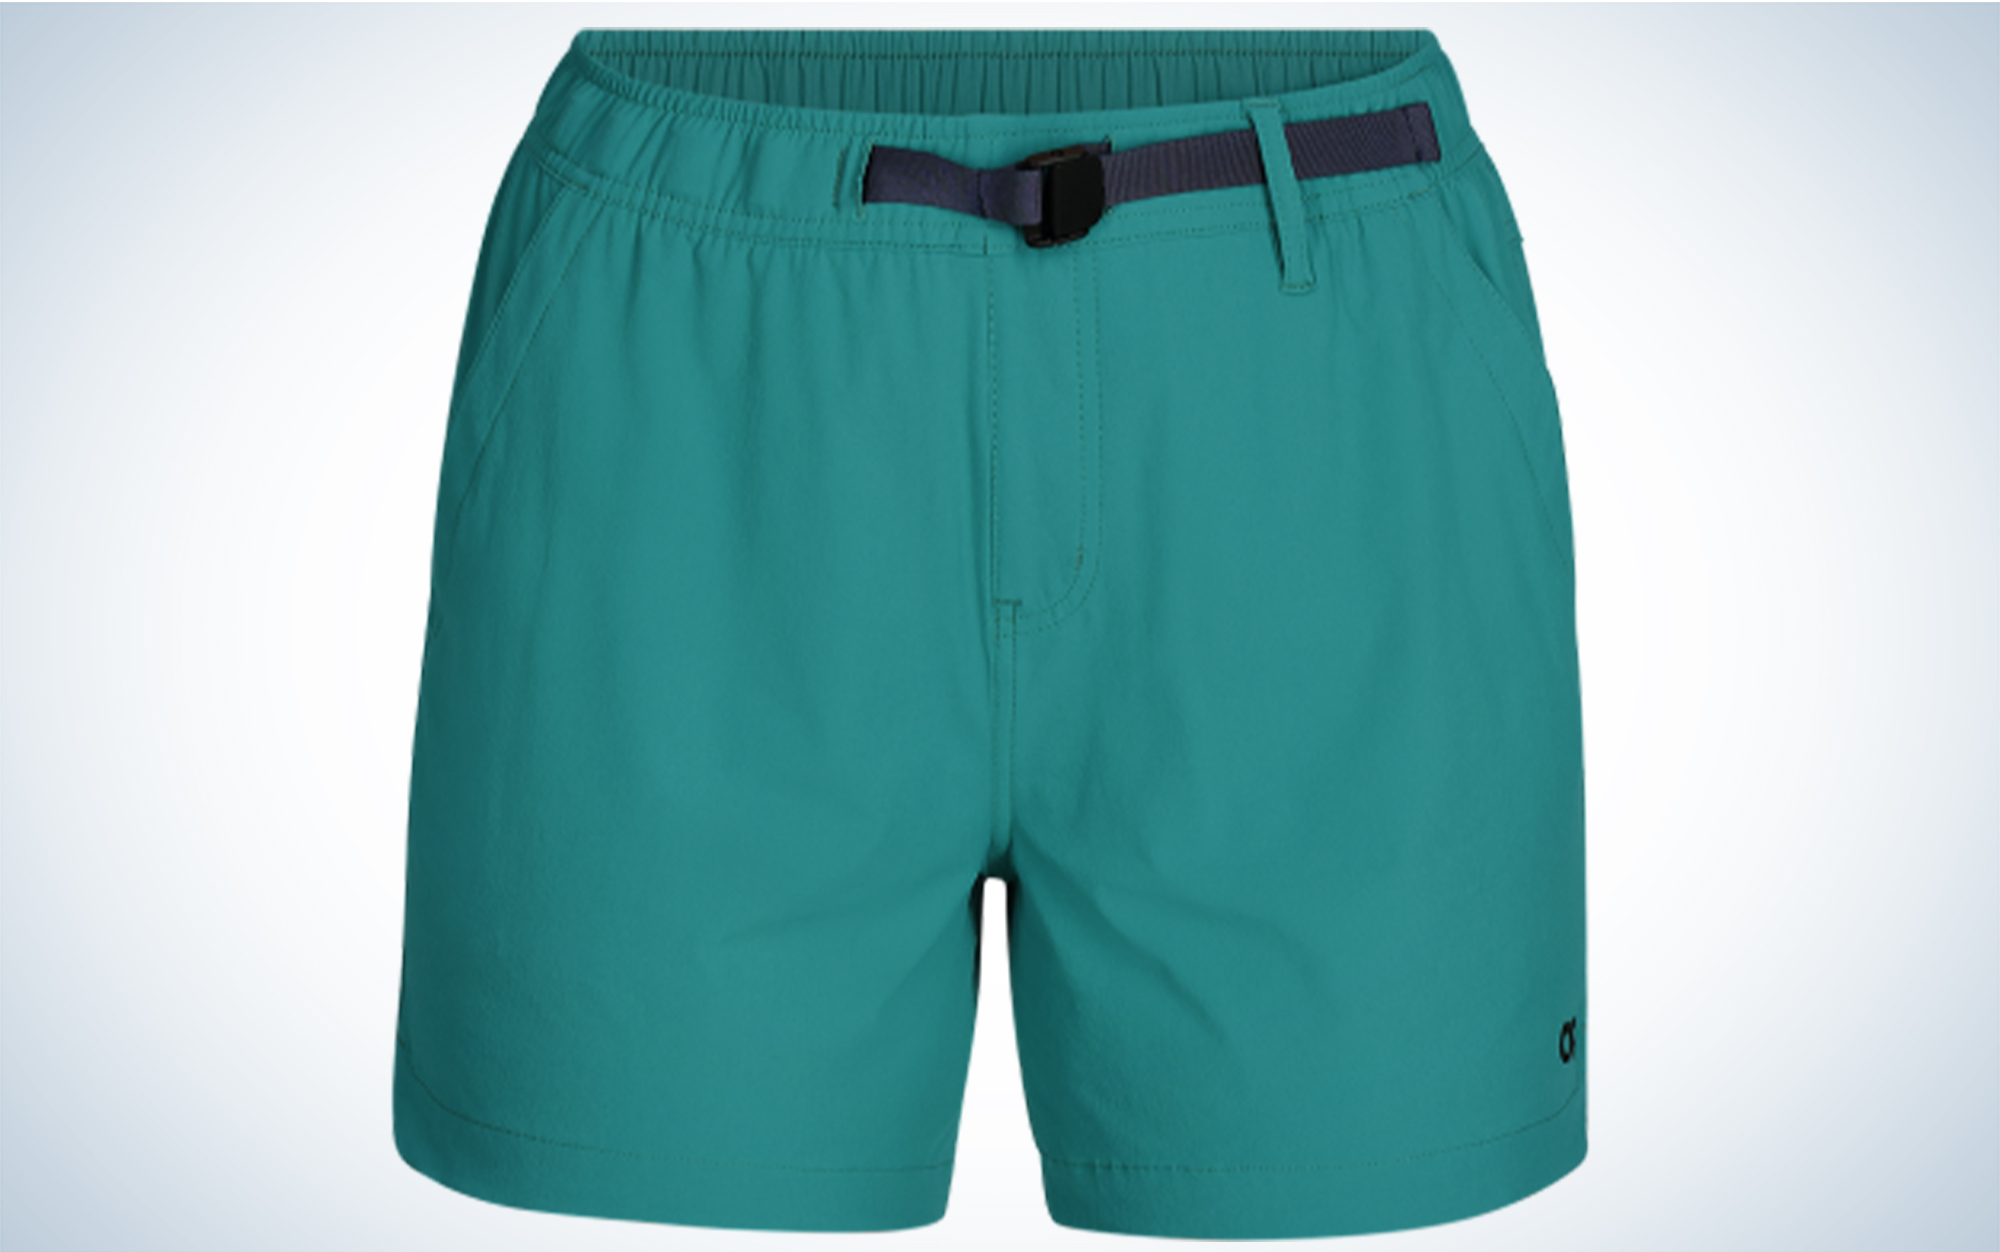 We tested the Outdoor Research Ferrosi Shorts.